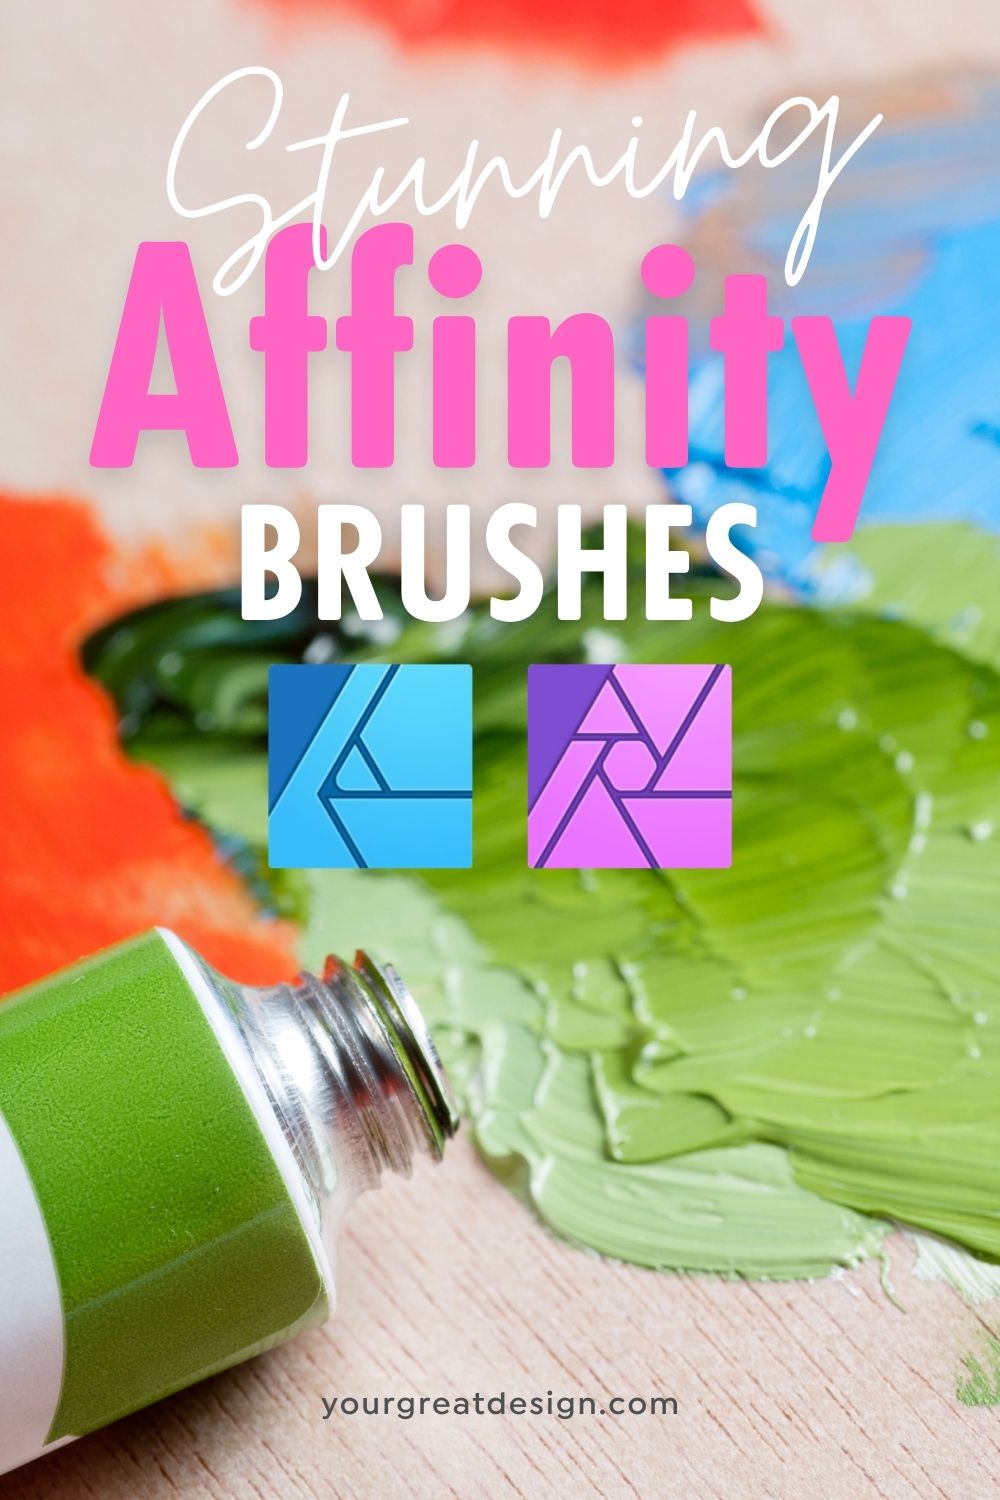 Oil Painting Brushes For Affinity - Design Cuts